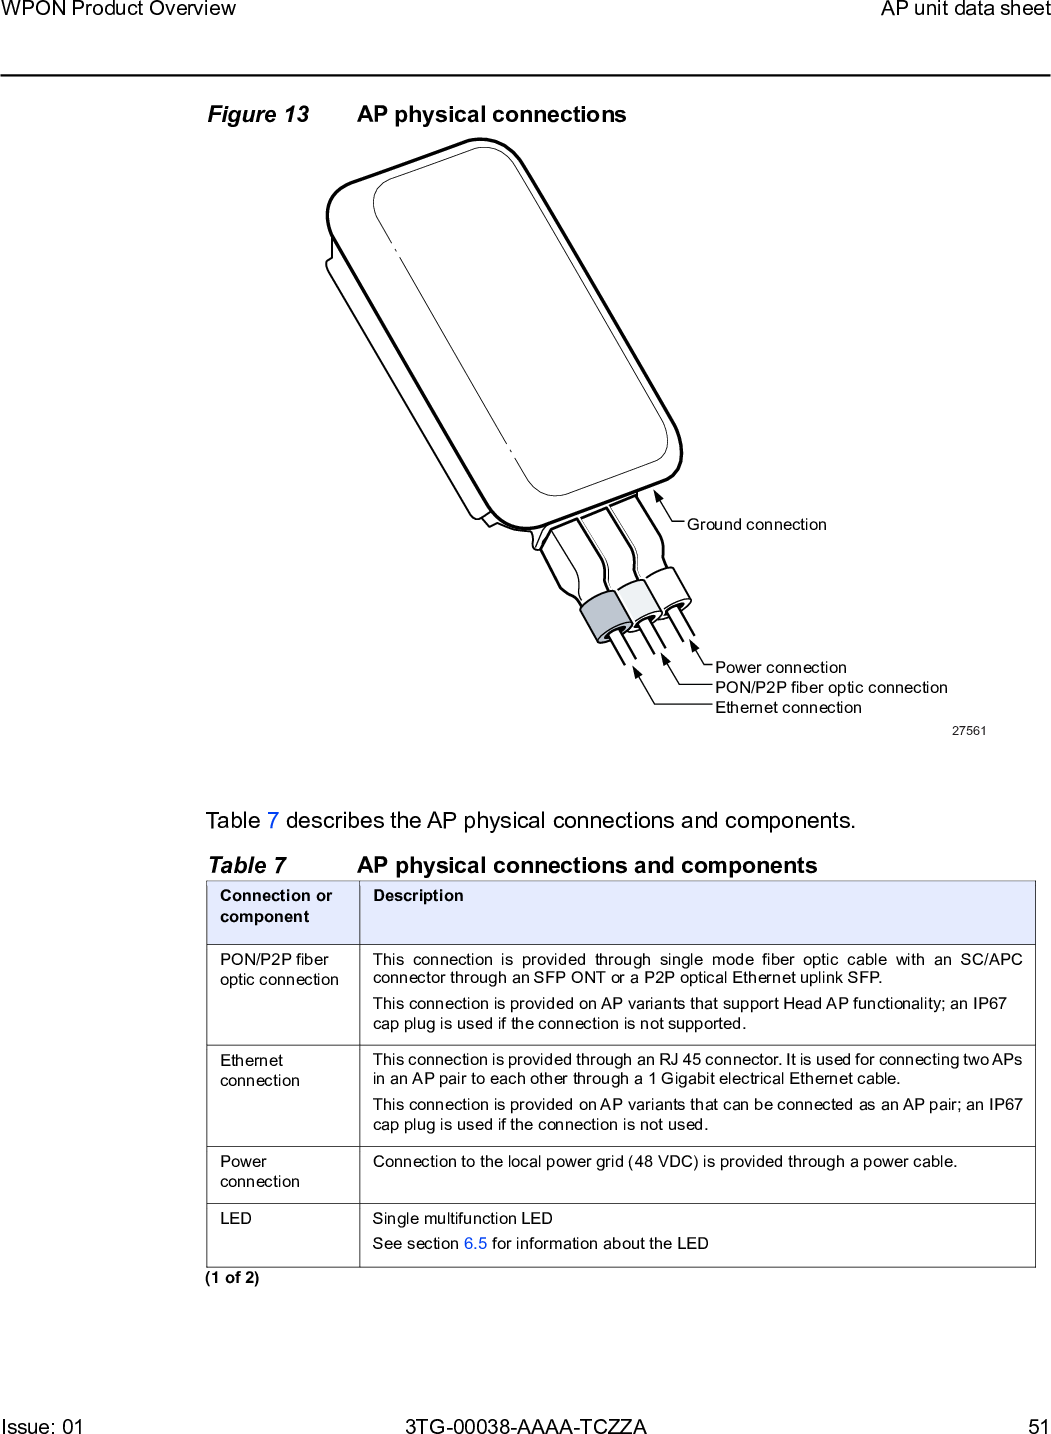 Page 51 of Nokia Bell 7577WPONAPDC WPON User Manual WPON Product Overview